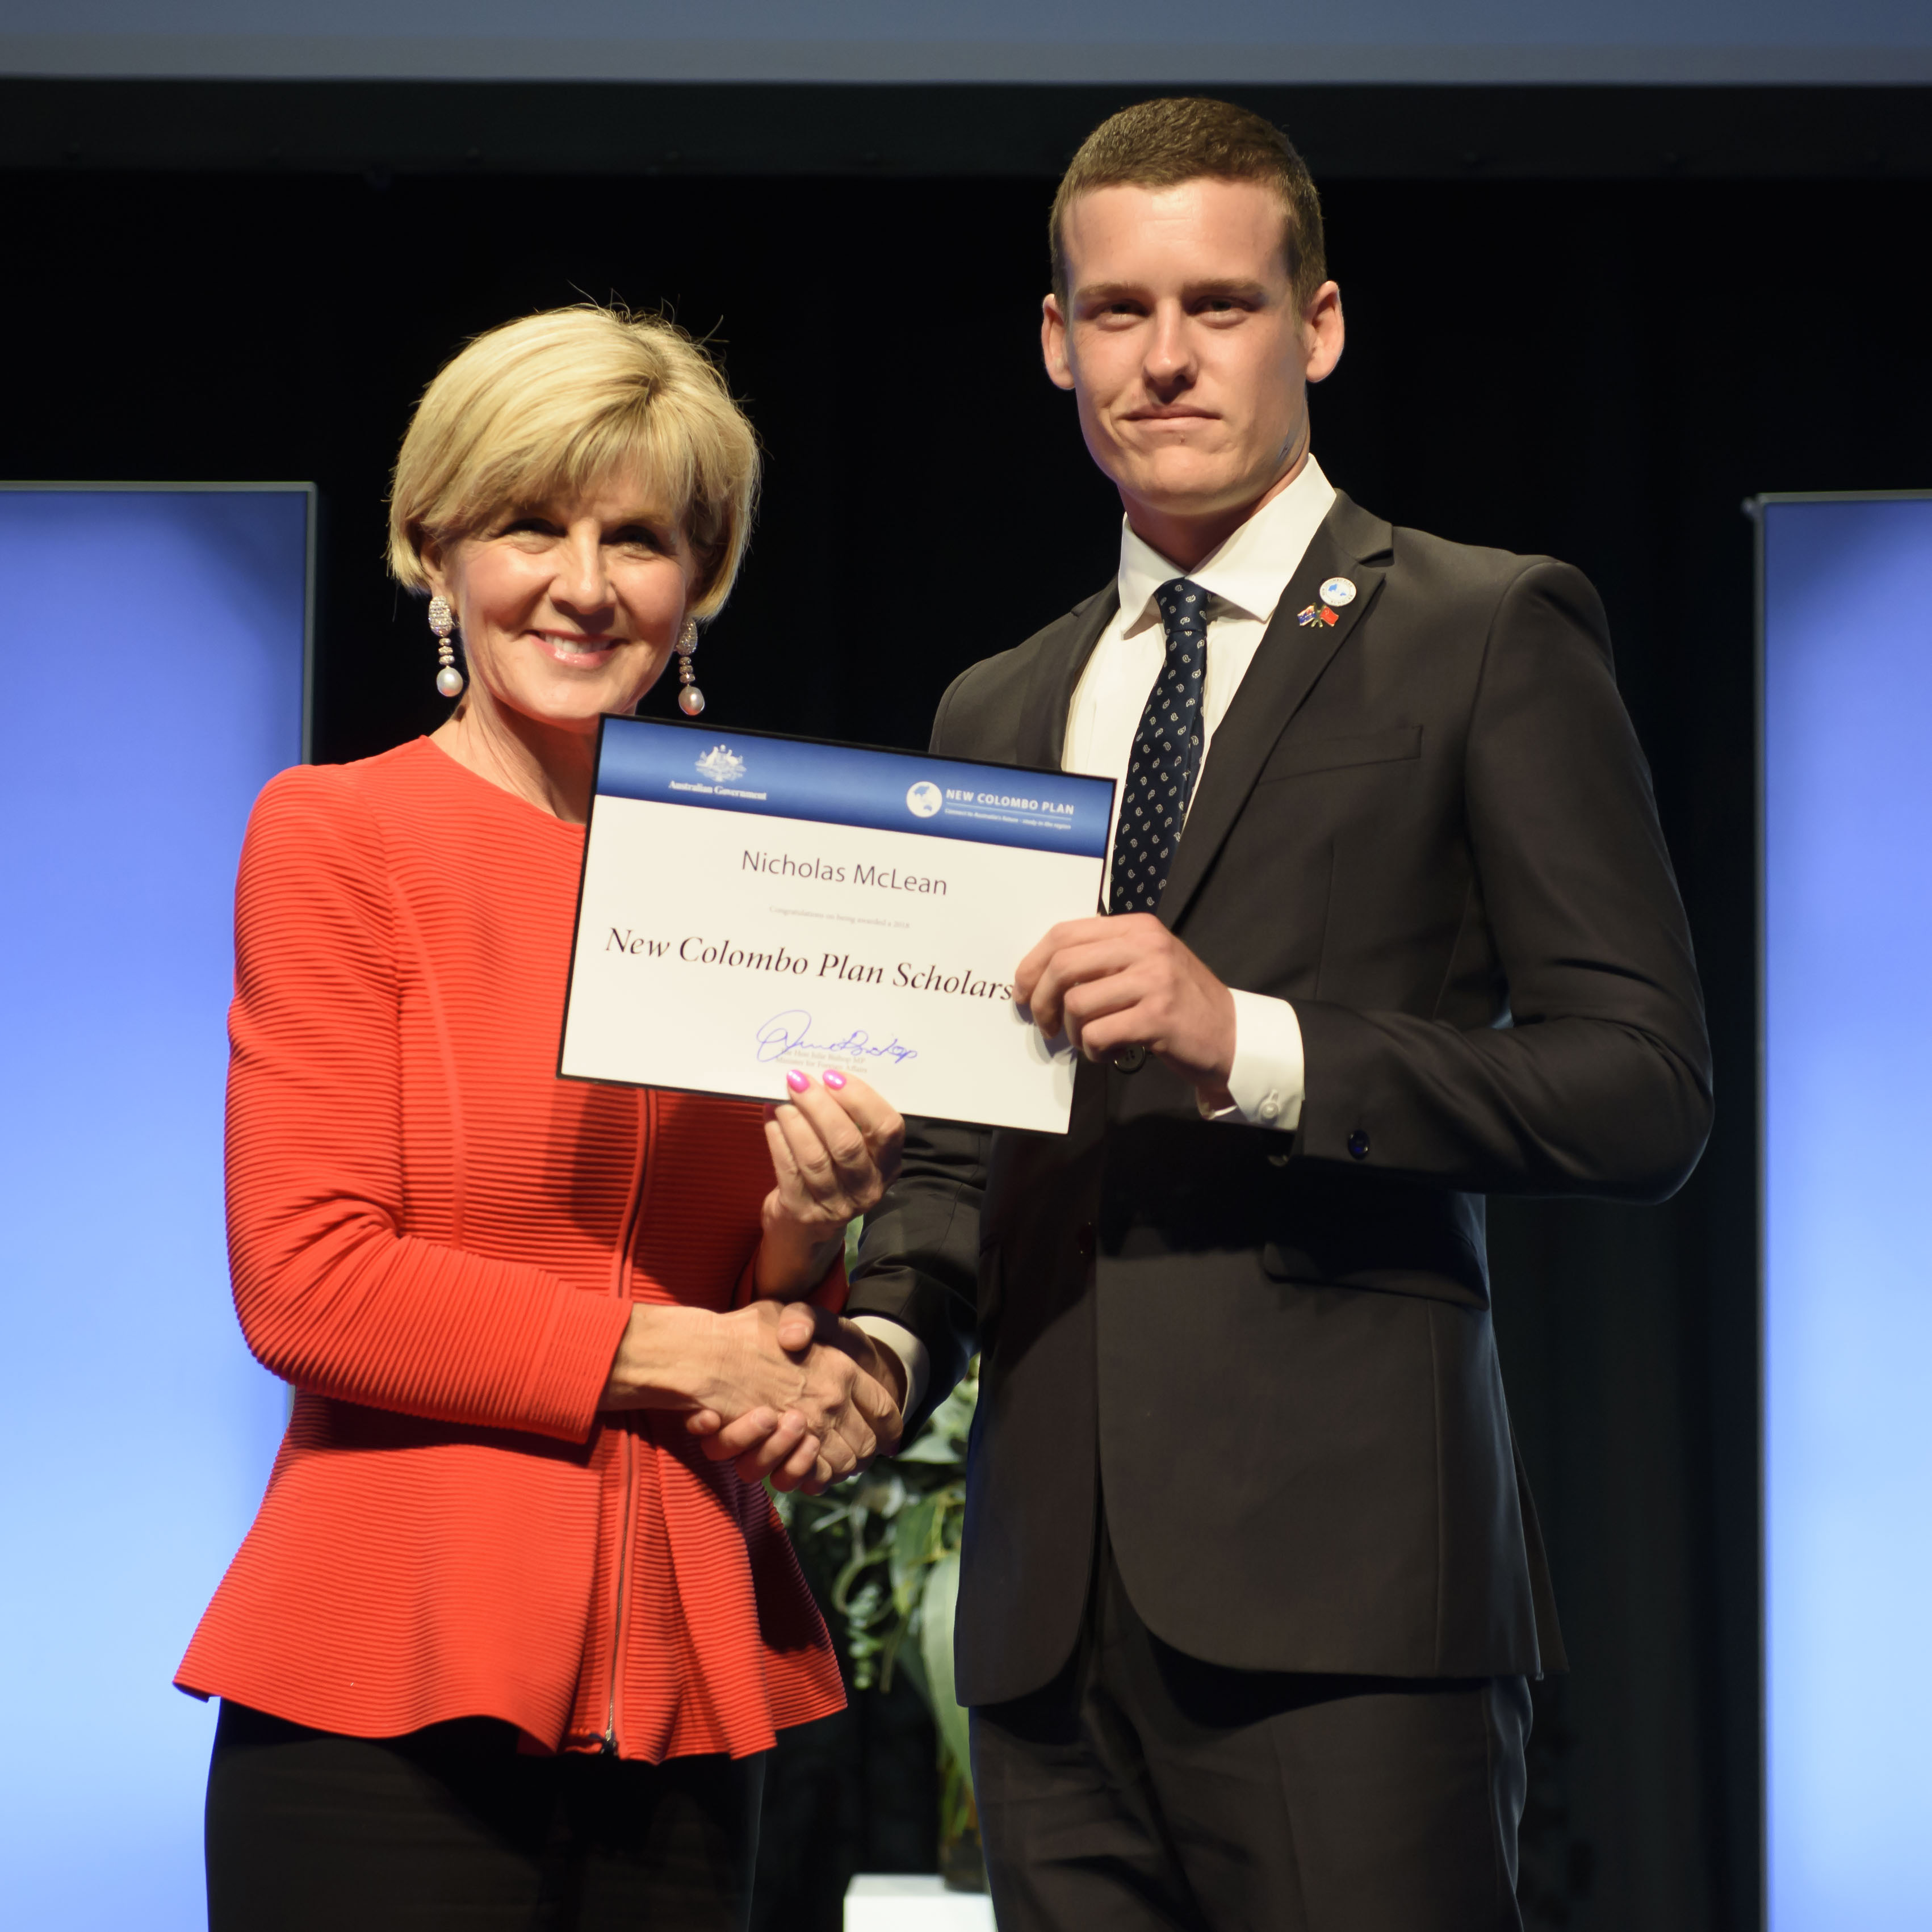 Foreign Minister Julie Bishop with Nicholas Mclean, 2018 New Colombo Plan scholar.